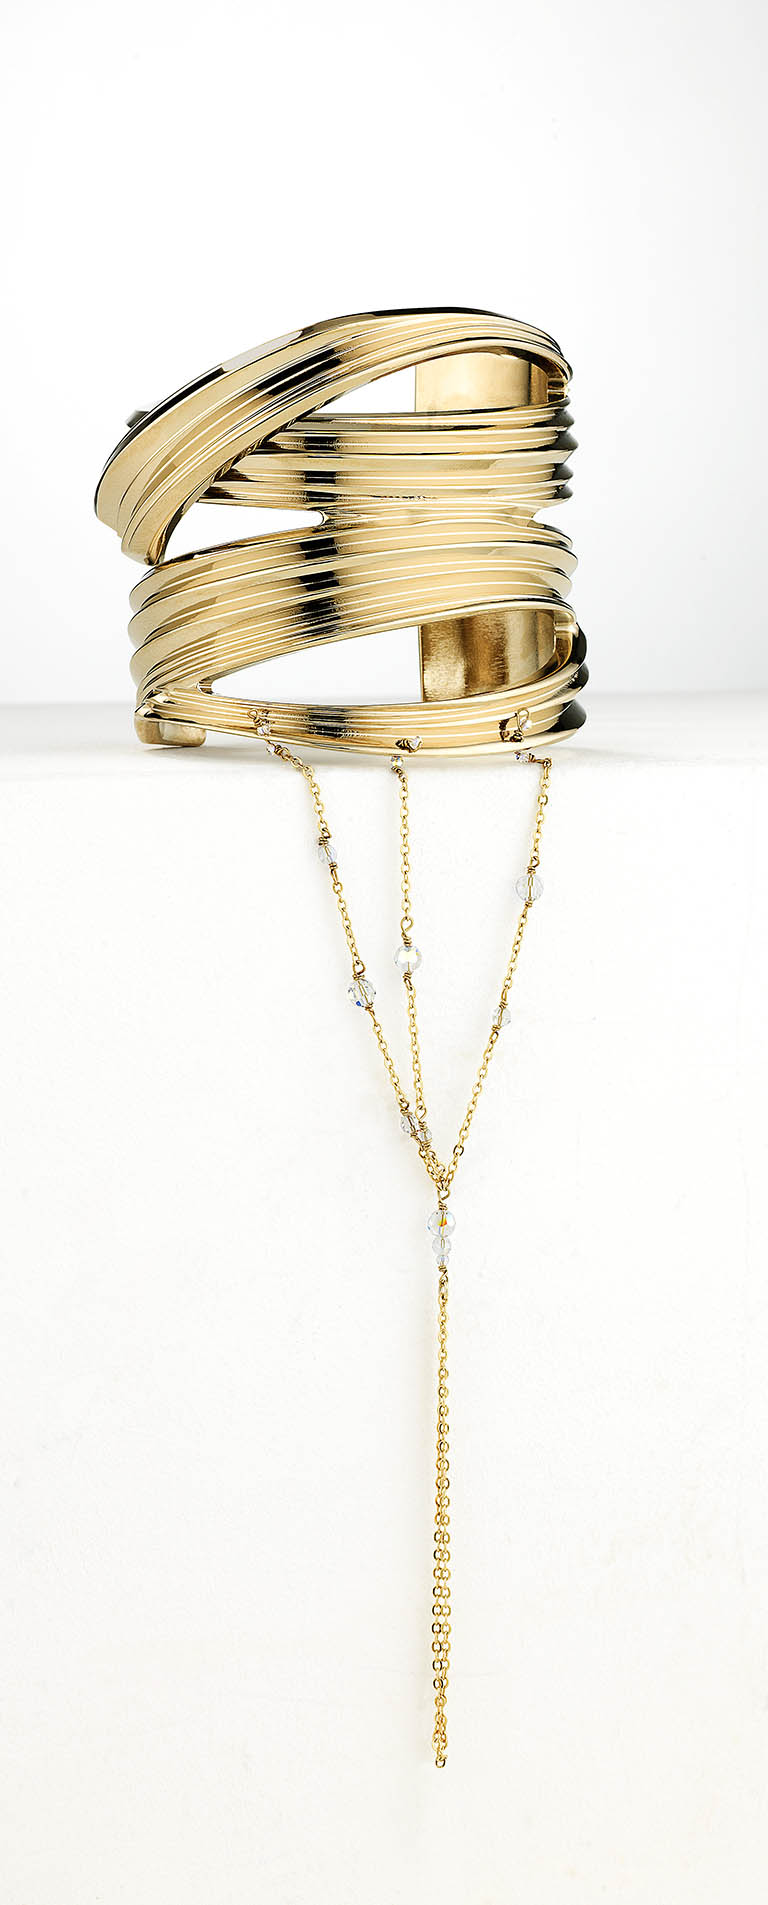 Packshot Factory - Fine jewellery - Eden Diodati gold ring with chain